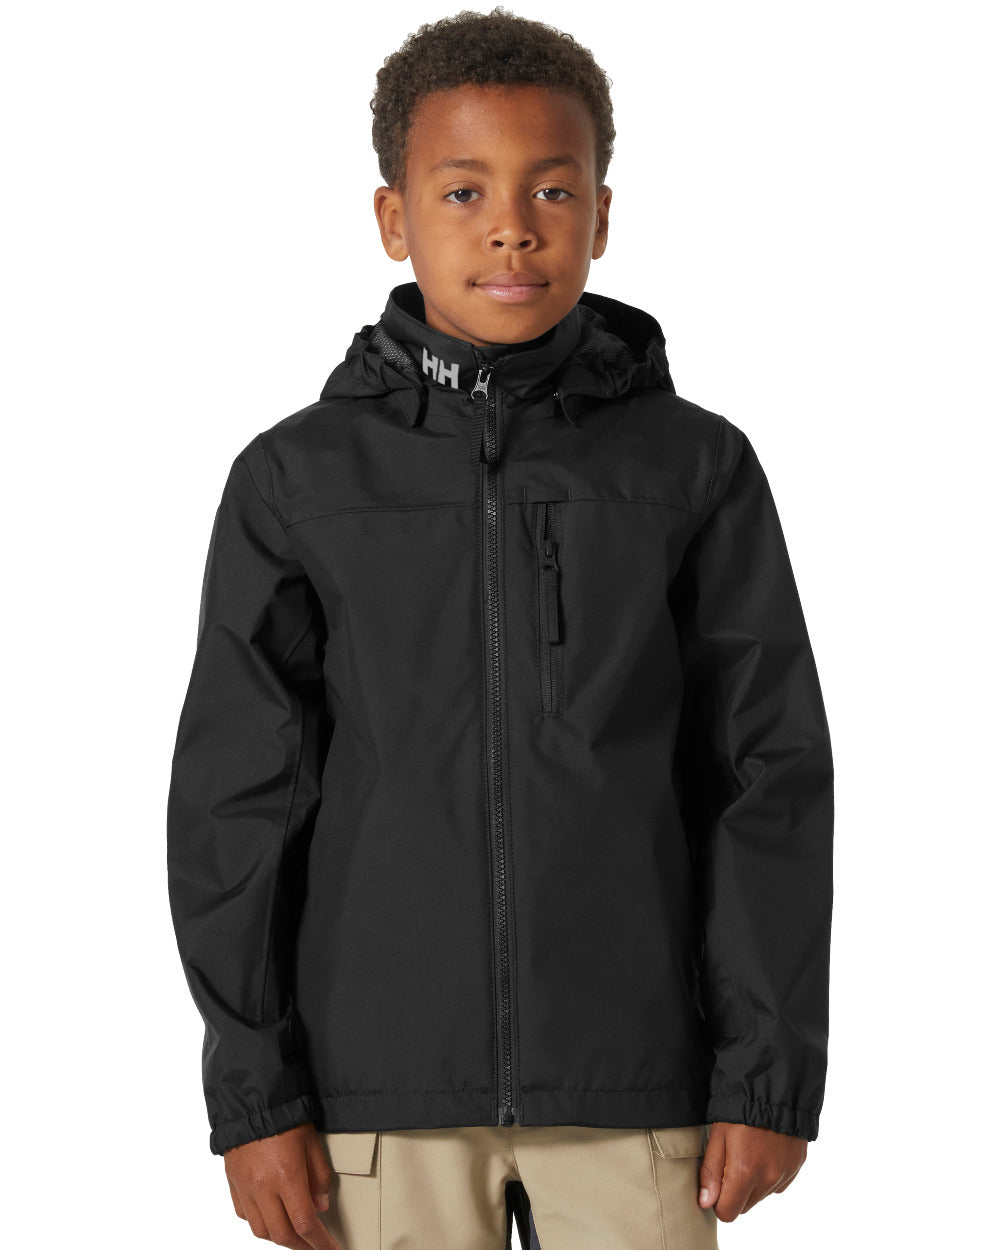 Black Coloured Helly Hansen Childrens Crew Hooded Jacket On A White Background 